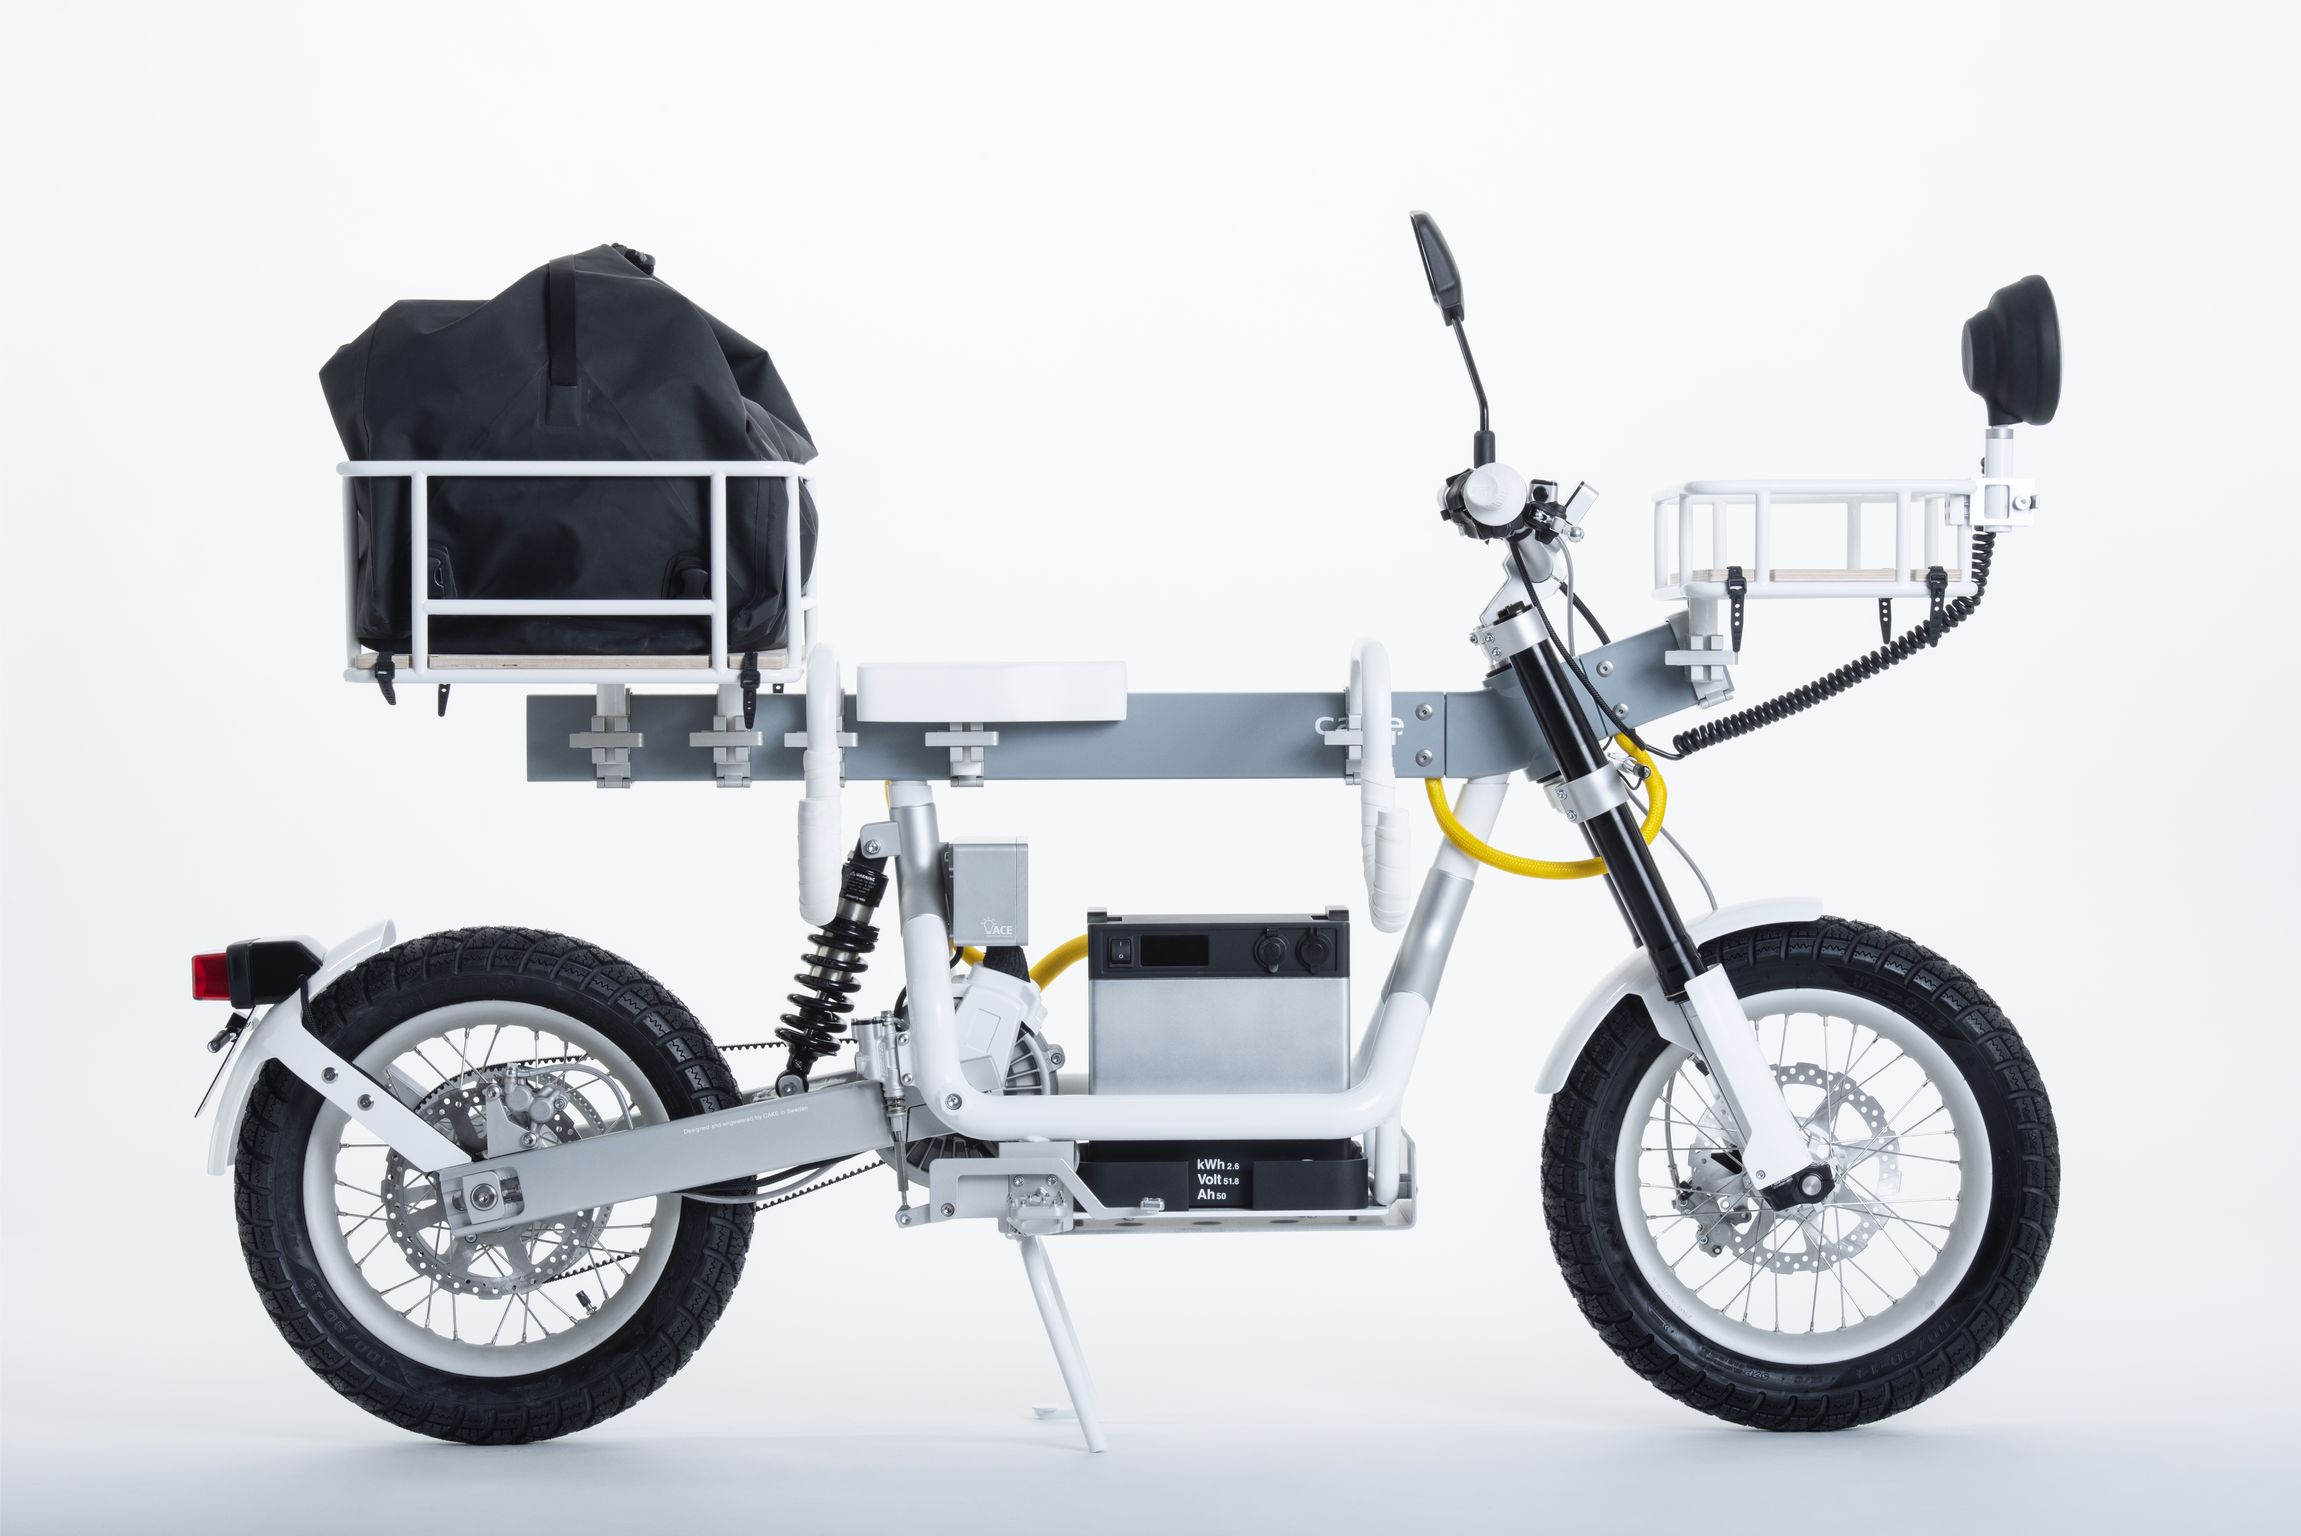 Ösa - Commuter focus with offroad capability